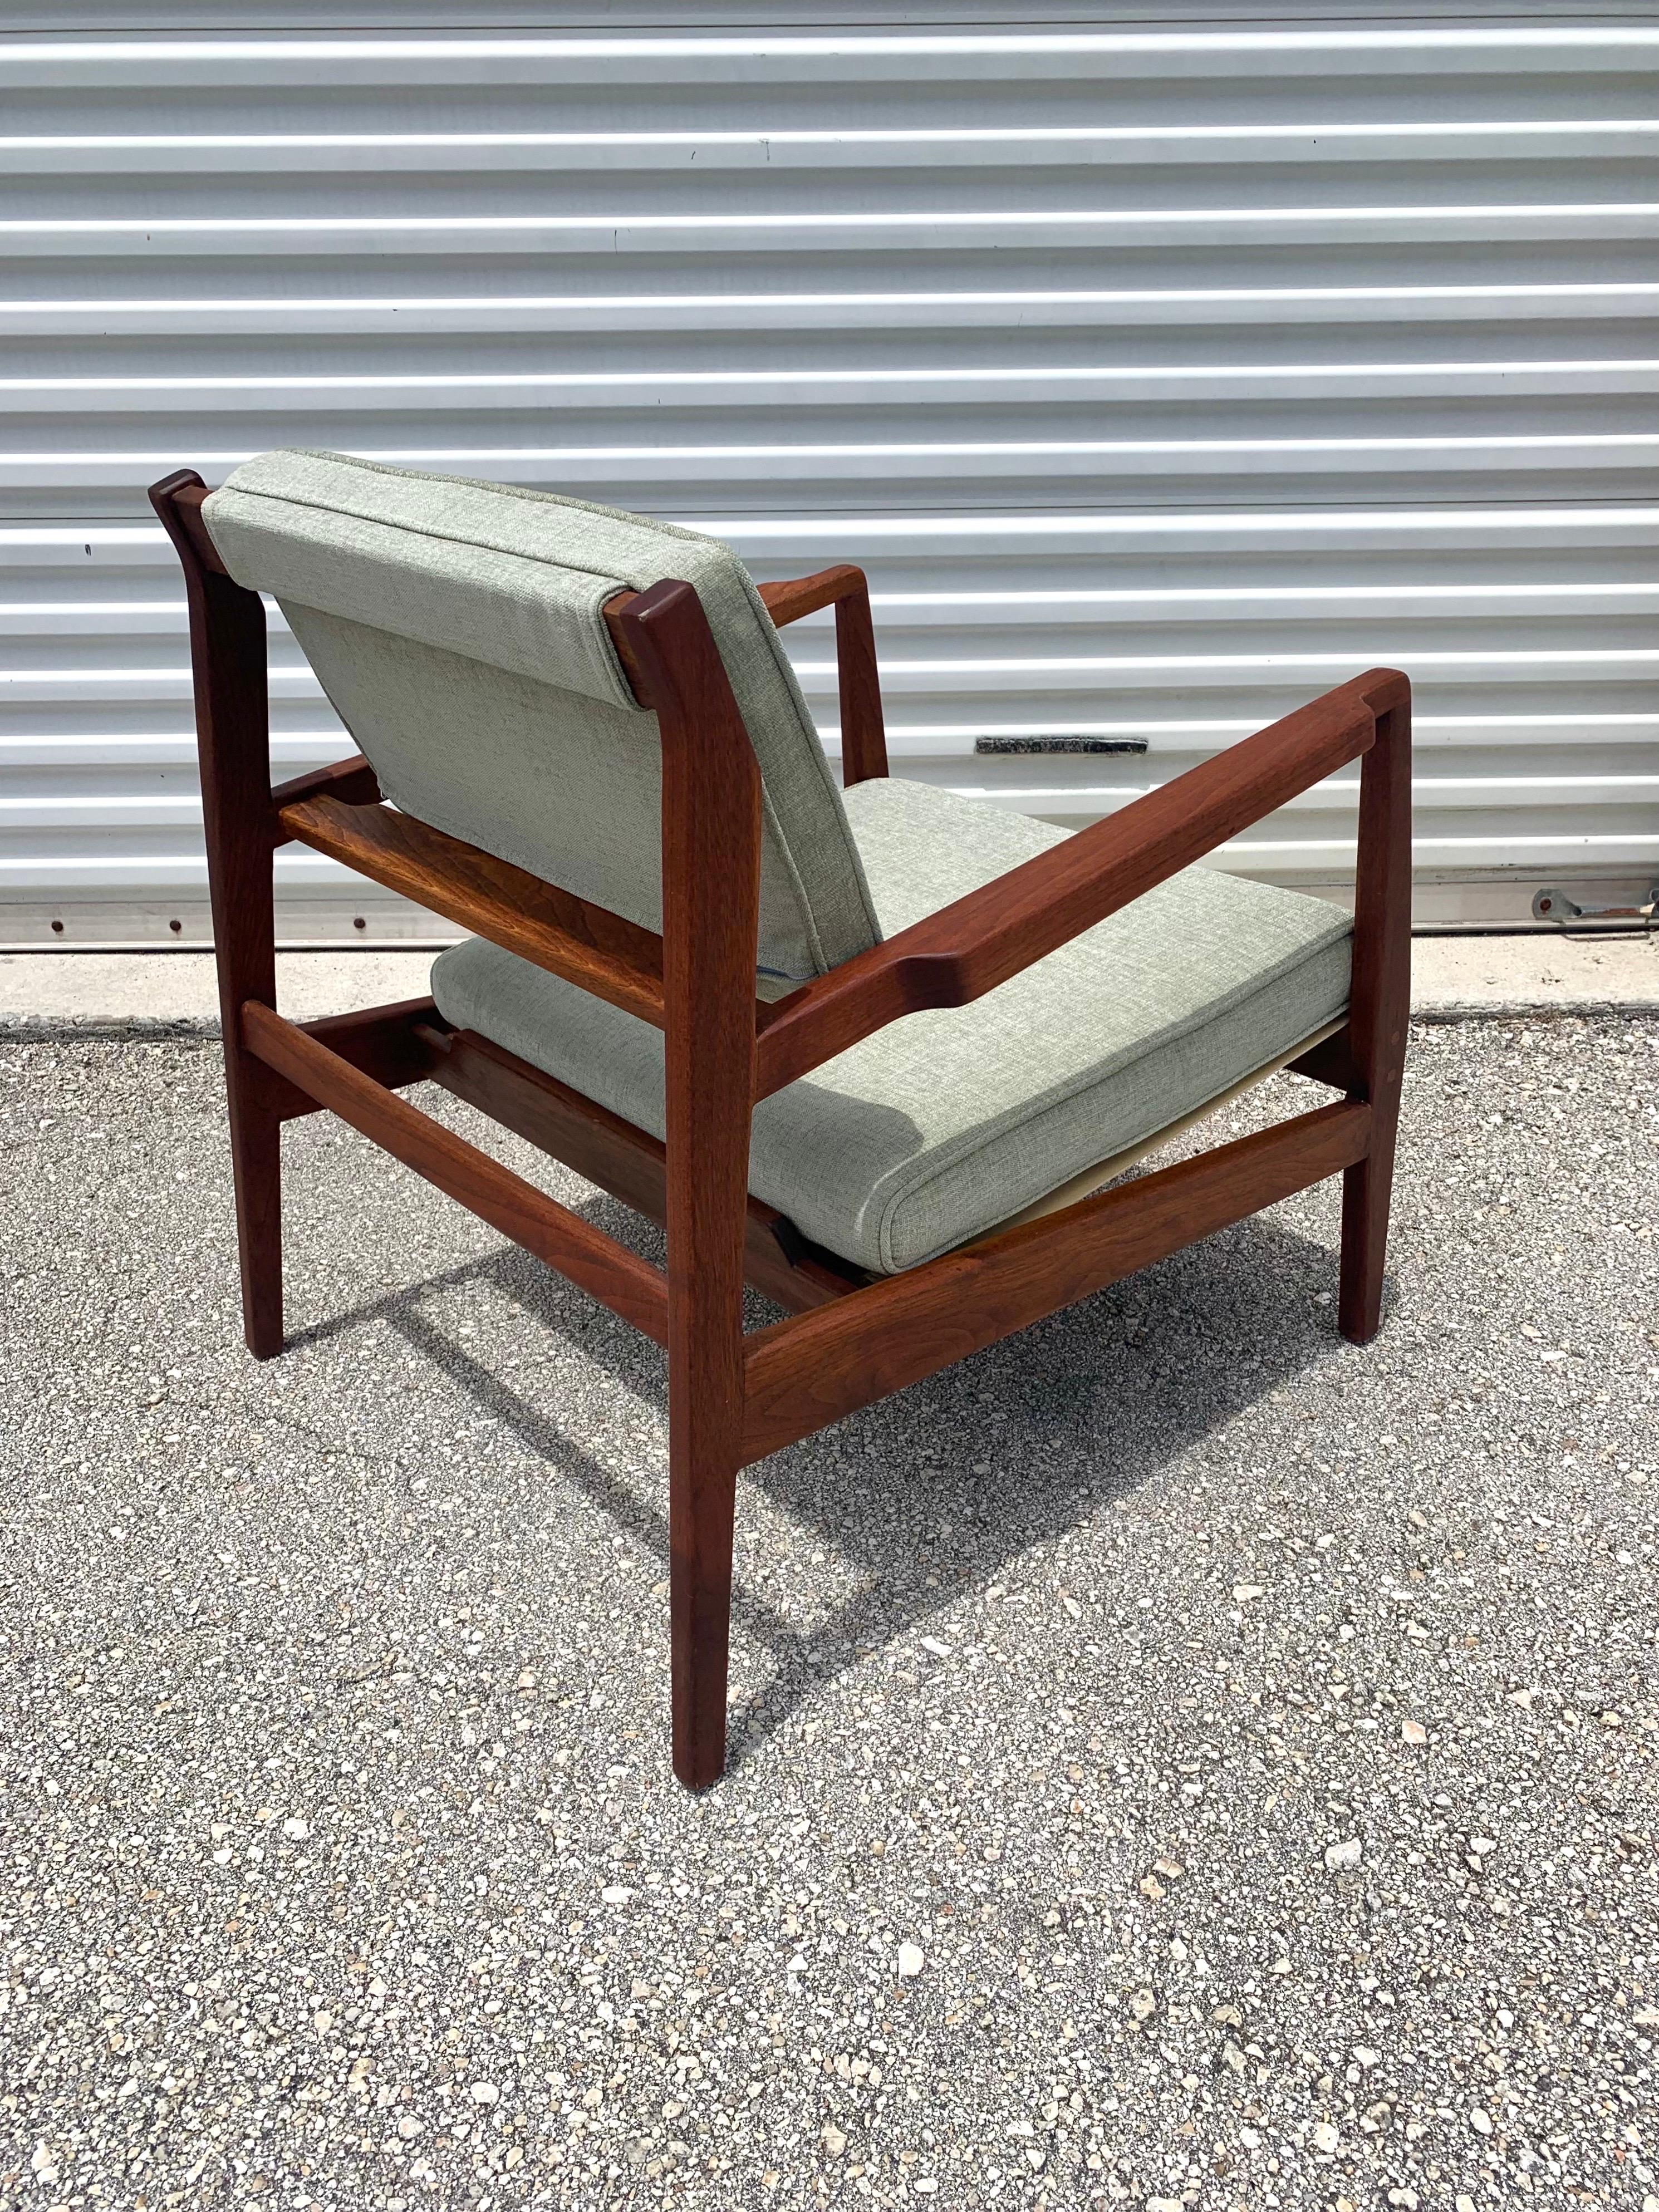 20th Century Mid-Century Modern Jens Risom U 460 Lounge Chair in Walnut and Sage Green For Sale